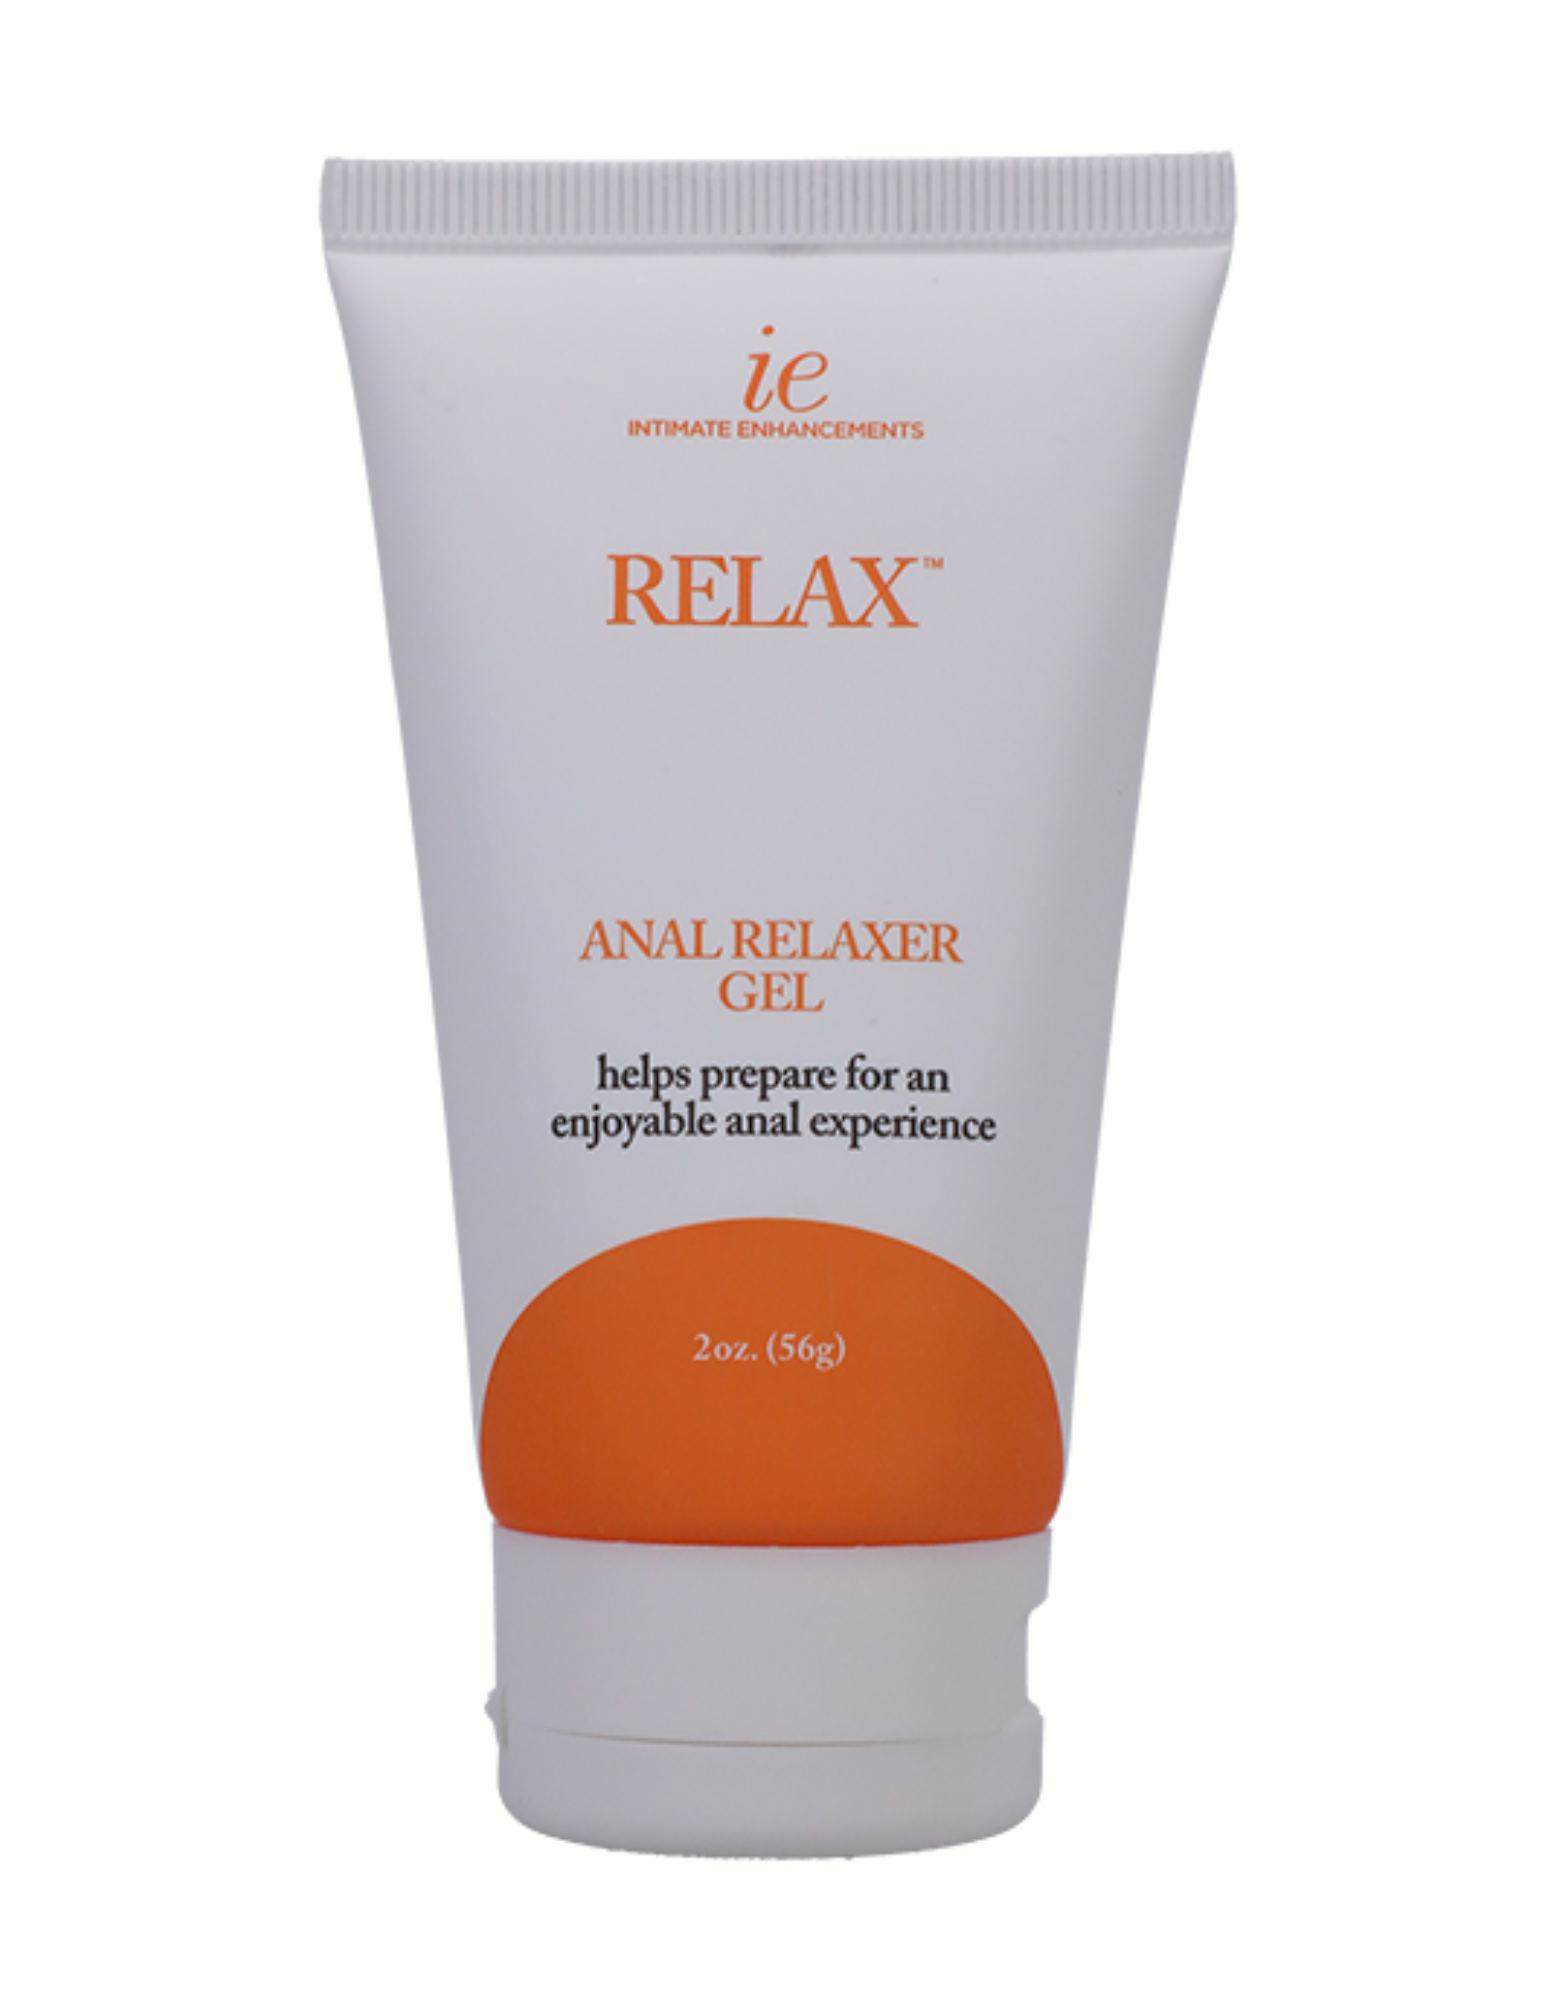 Photo of the Intimate Enhancements Relax Anal Relaxer for Everyone tube from Doc Johnson.